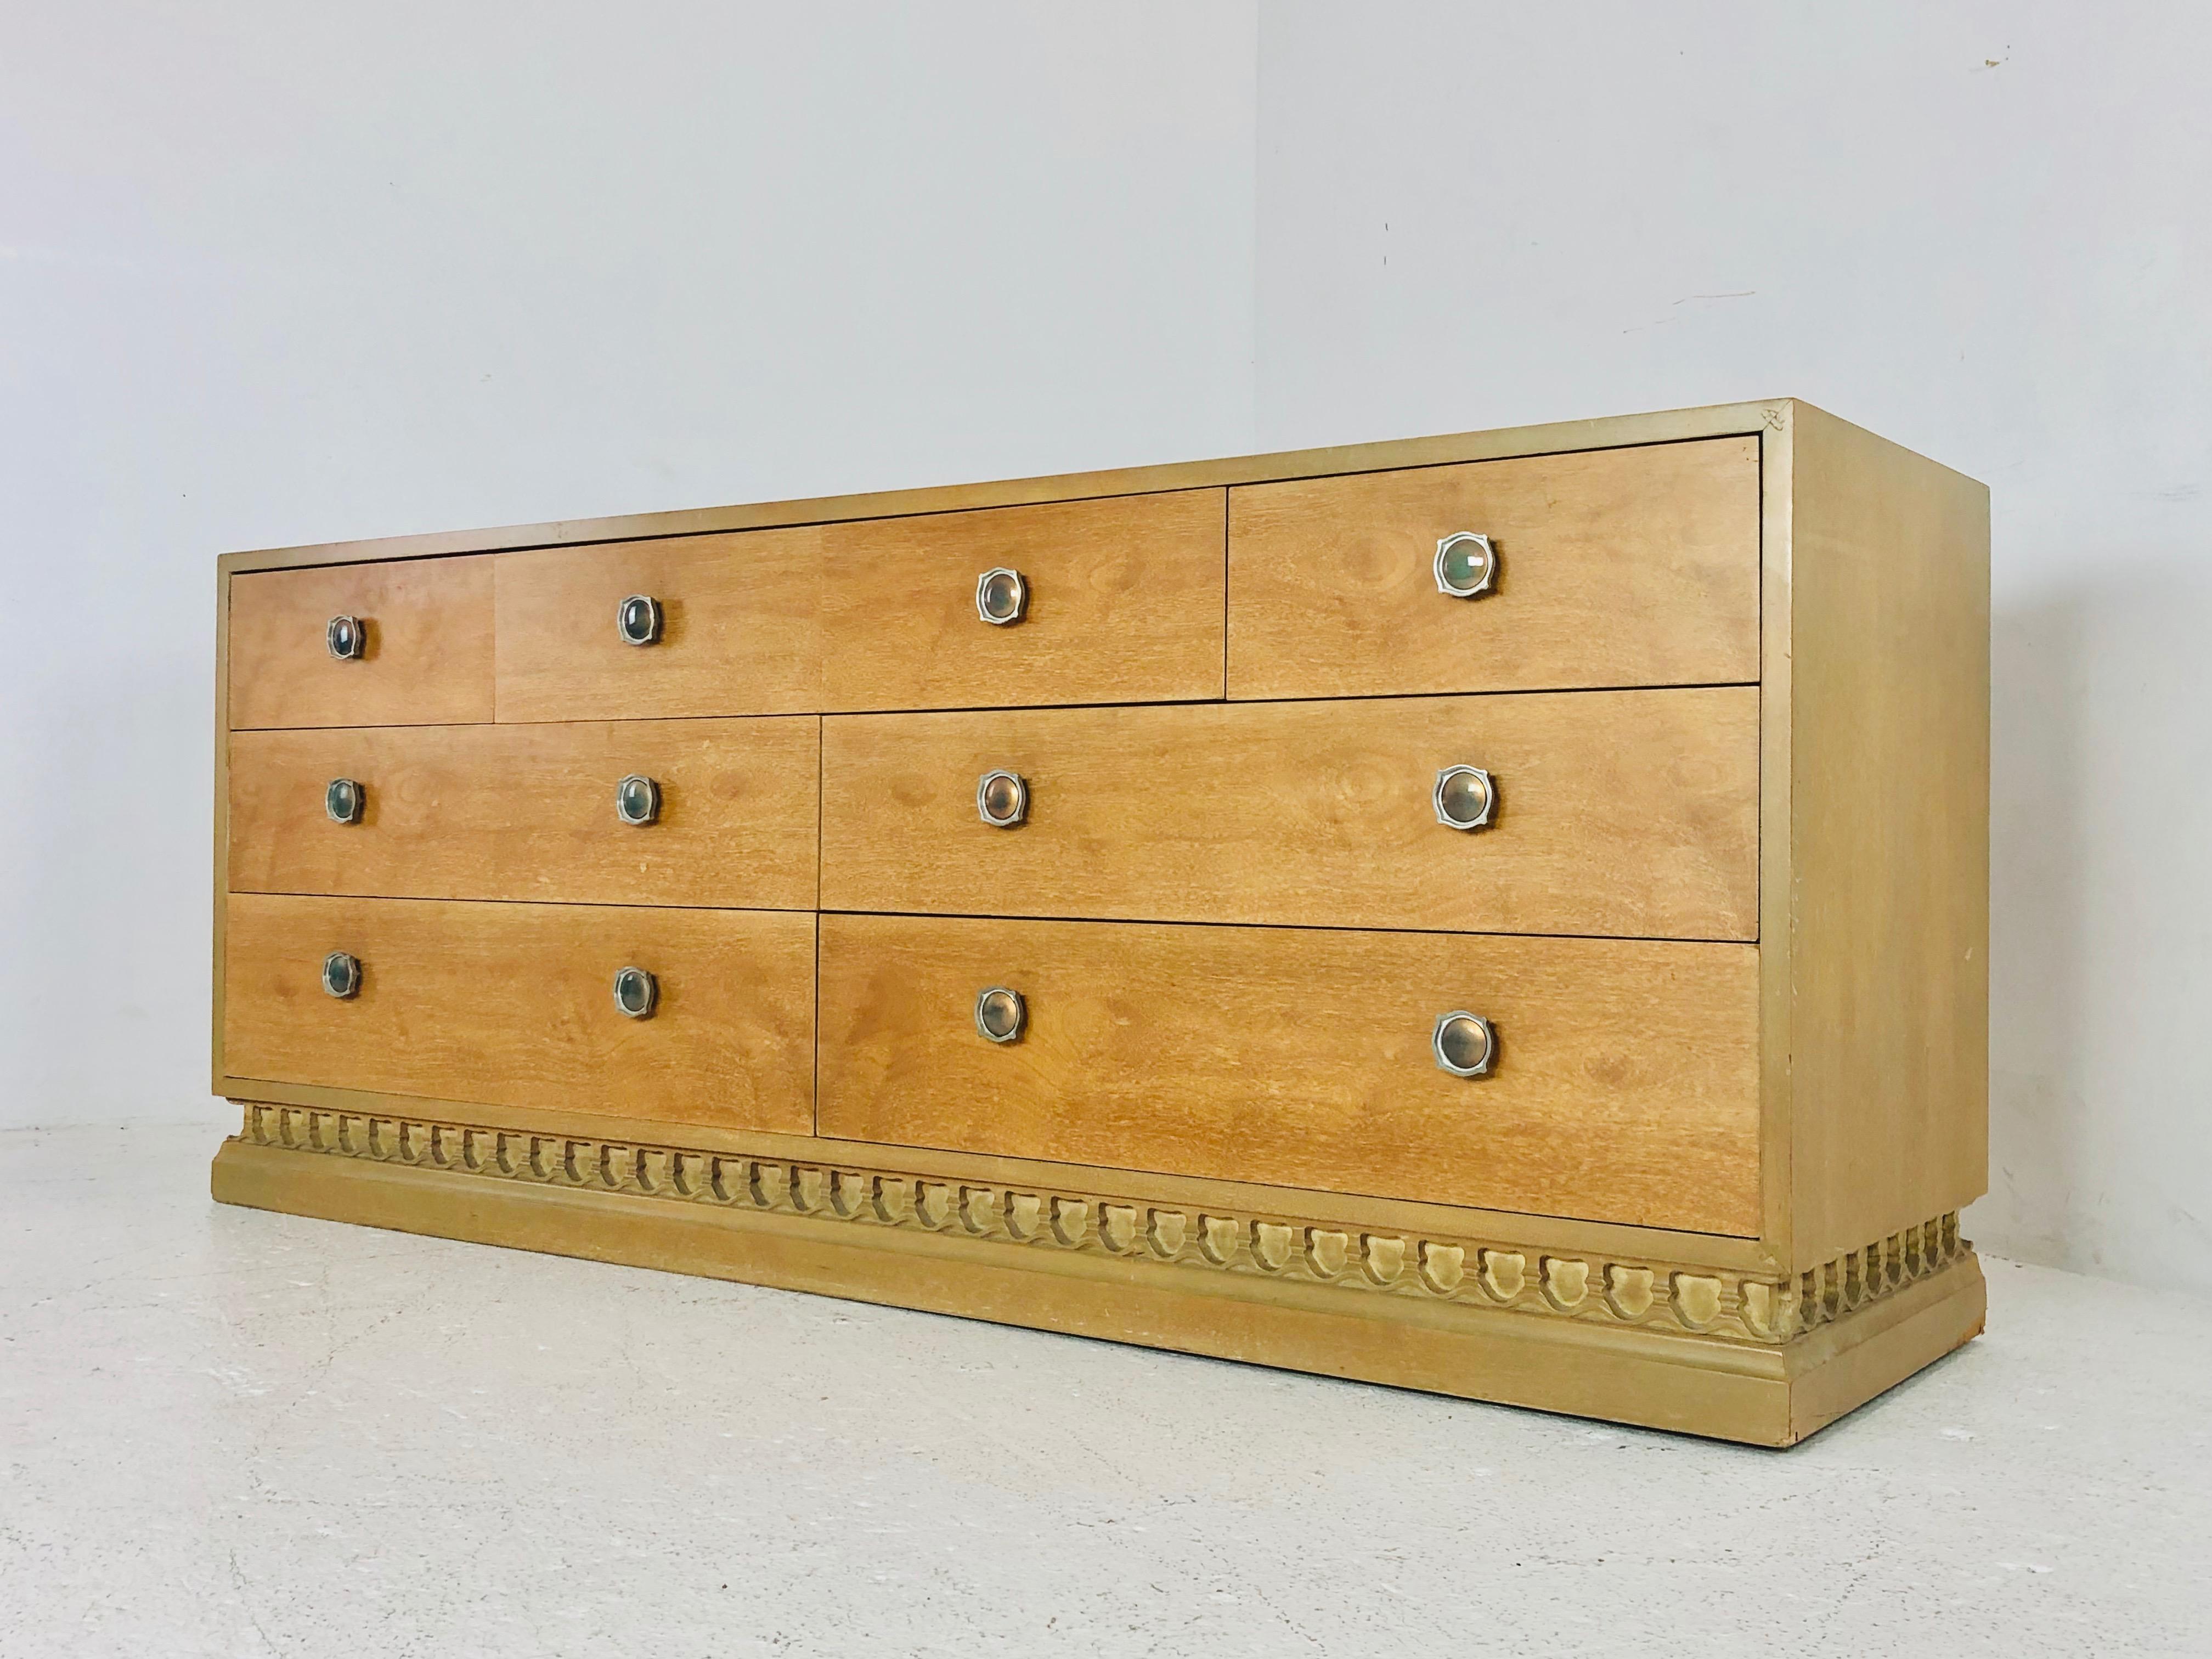 Midcentury casa del sol dresser by Drexel. Dresser is in good vintage condition with veneer loss at base of dresser. Refinishing is recommended.

Dimensions:
72 W x 20 D x 29.5 H.